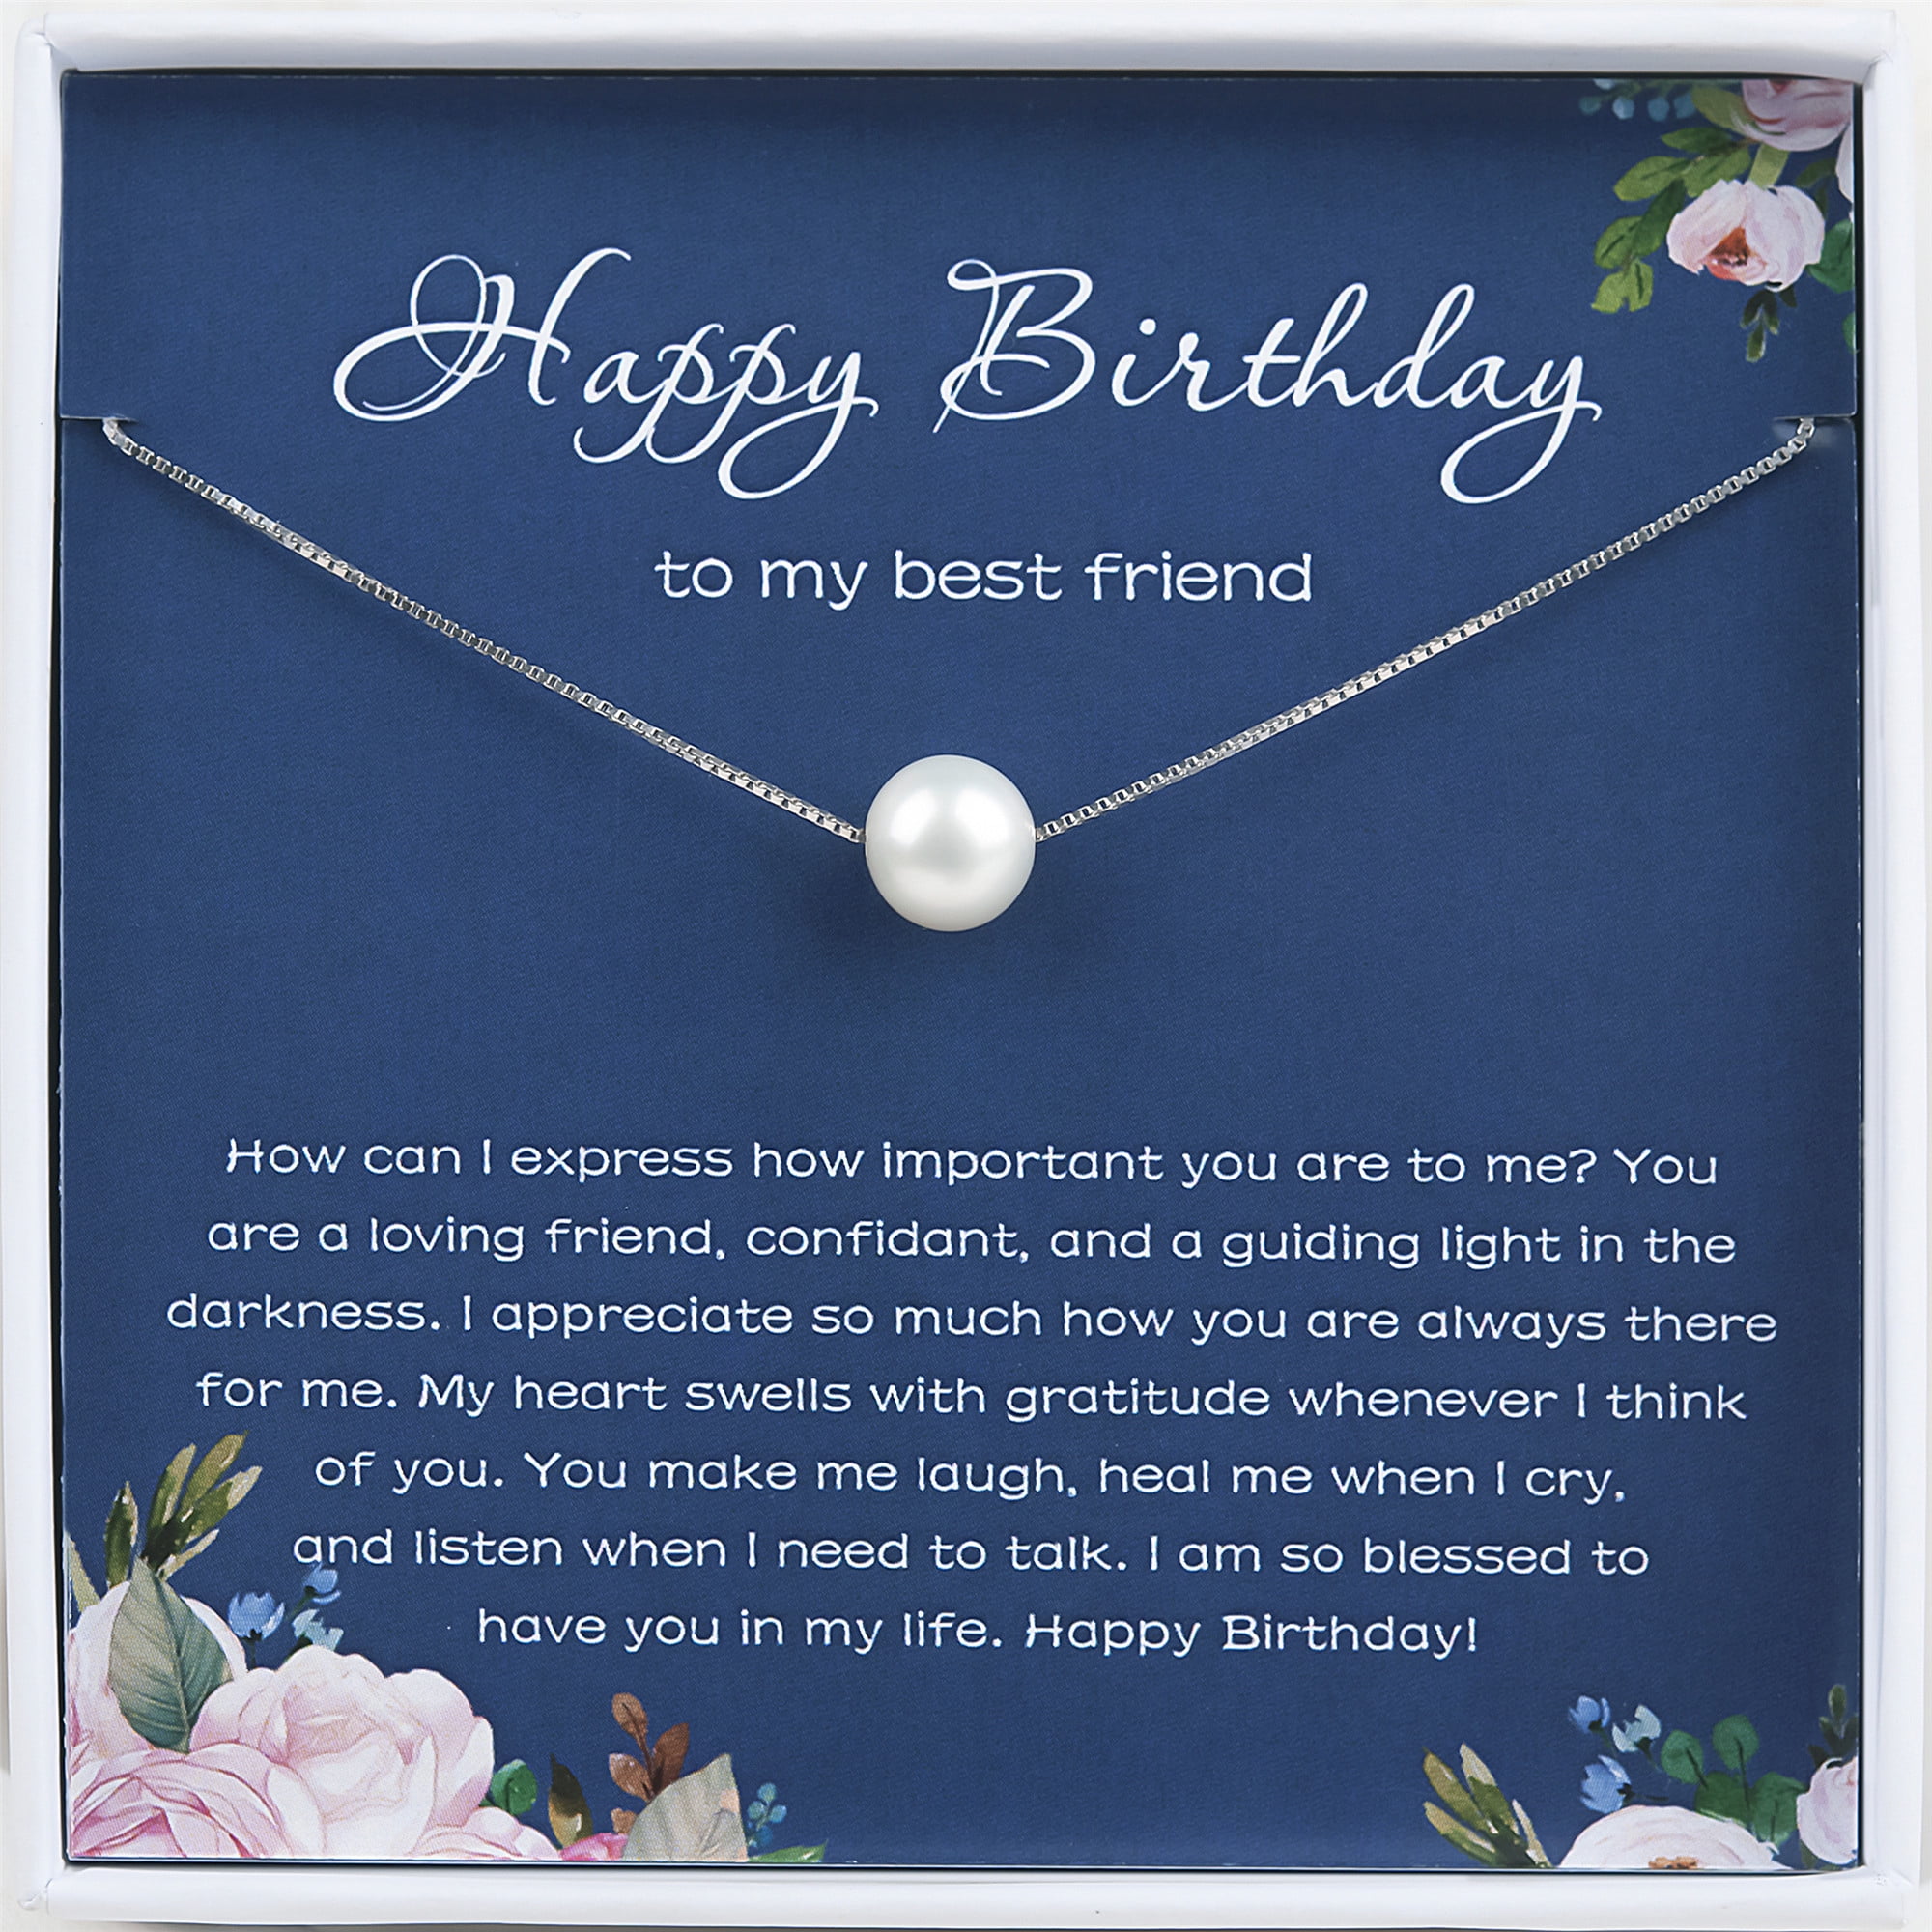 Birthday　My　Gold　Best　Best　Birthday　Gift　Pearl　Necklace　Pearl　for　to　Friend,　Necklace-[White　Chain]　Friend,　Happy　Anavia　BFF